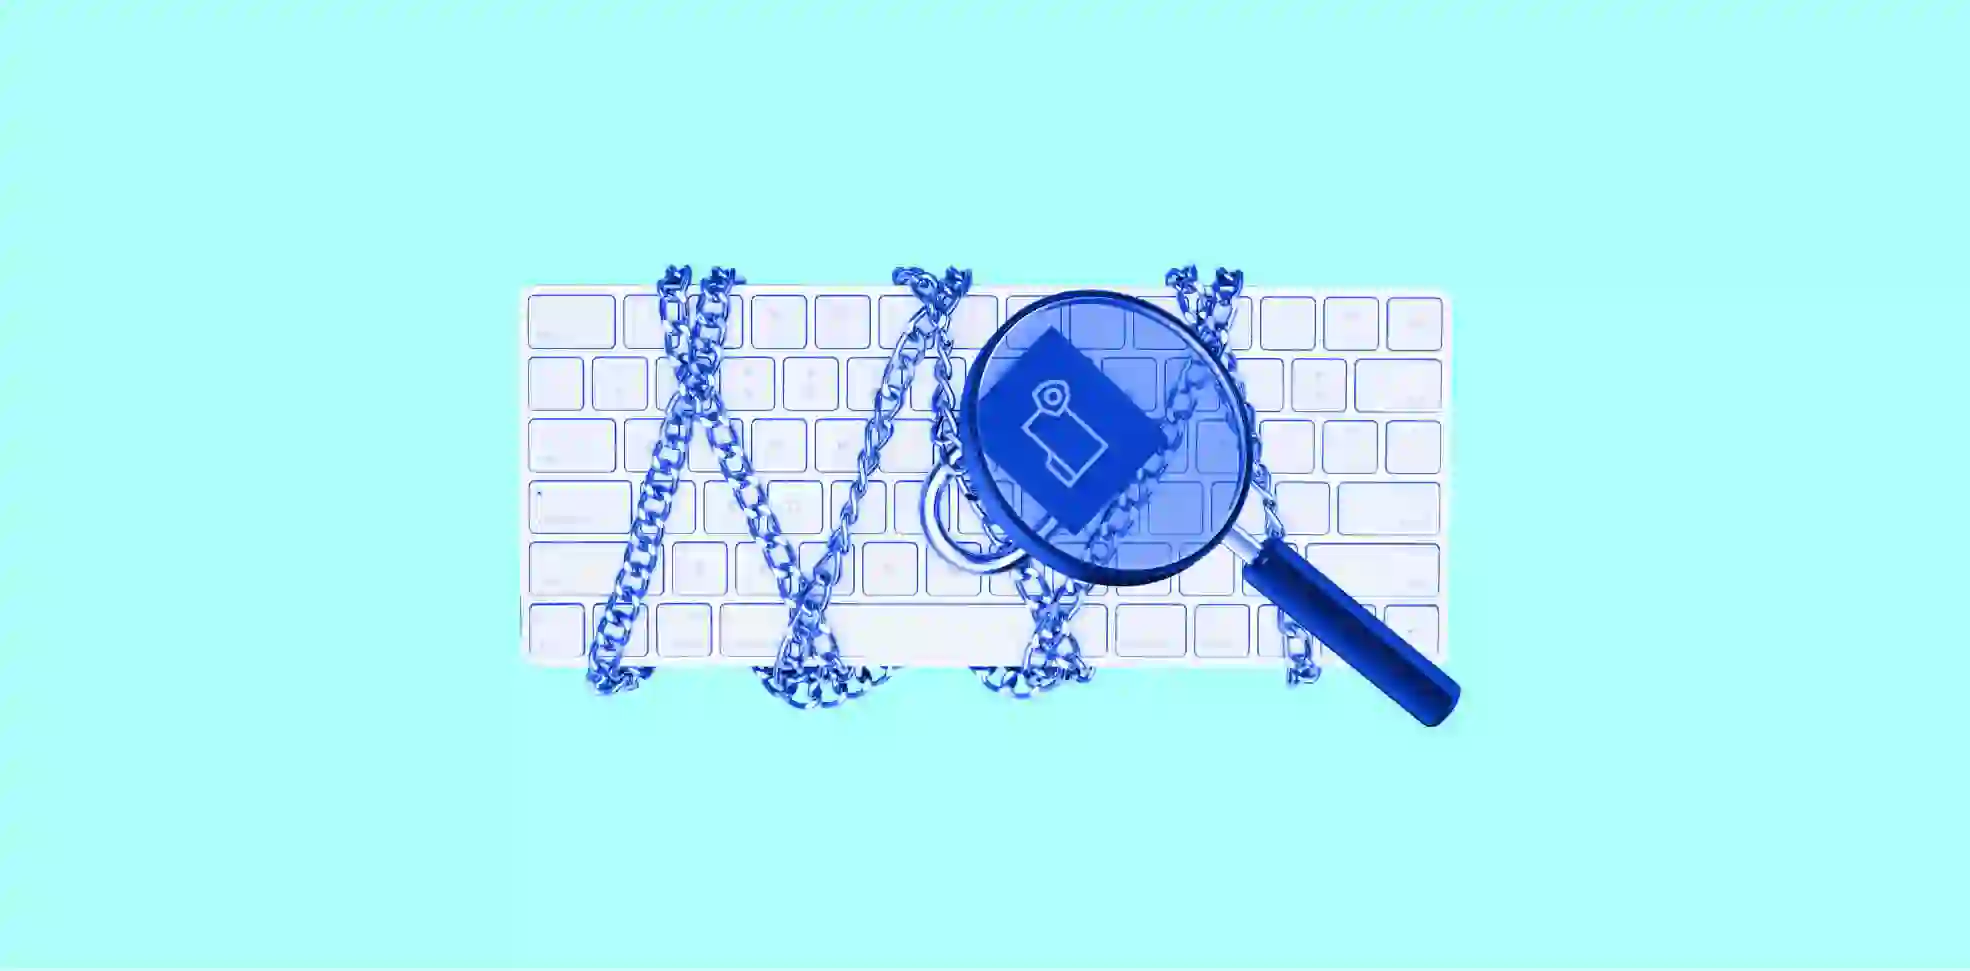 a keyboard wrapped in a chain with a lock is viewed under a magnifying glass on blue background